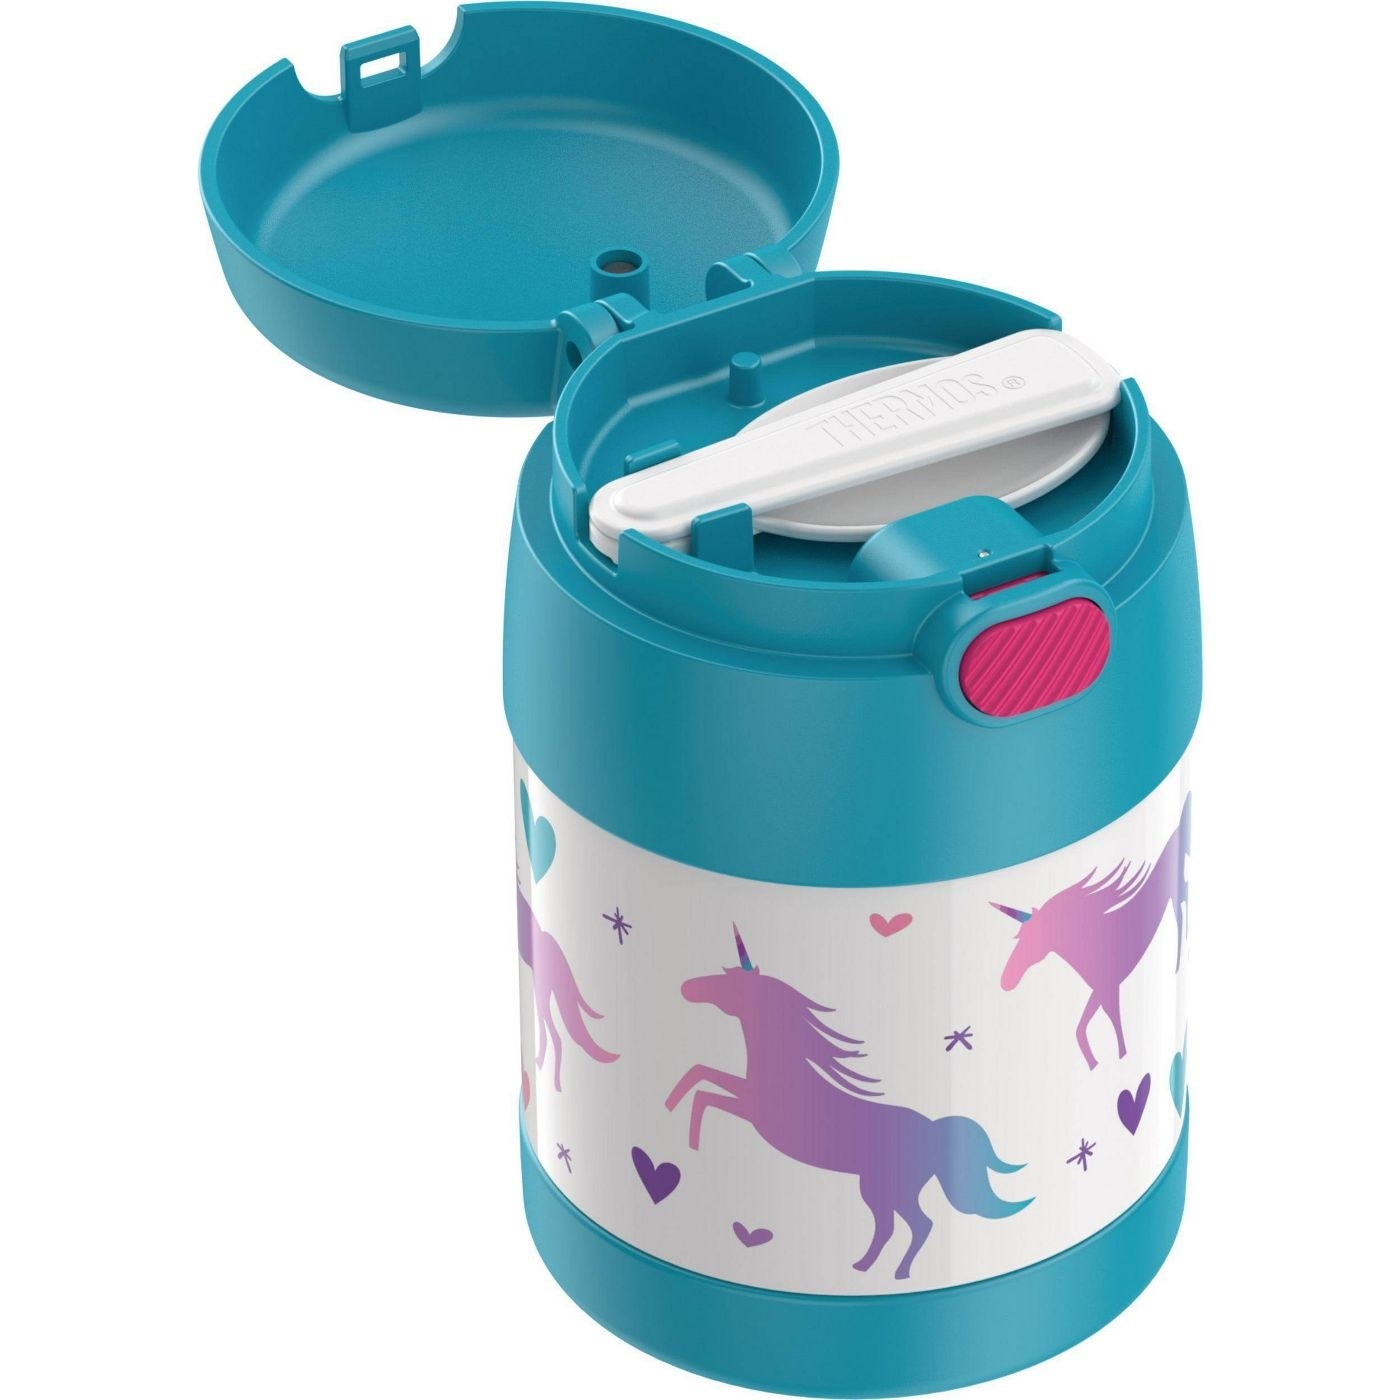 Teal thermos with unicorn design and flip lid, foldable plastic spoon inside the lid